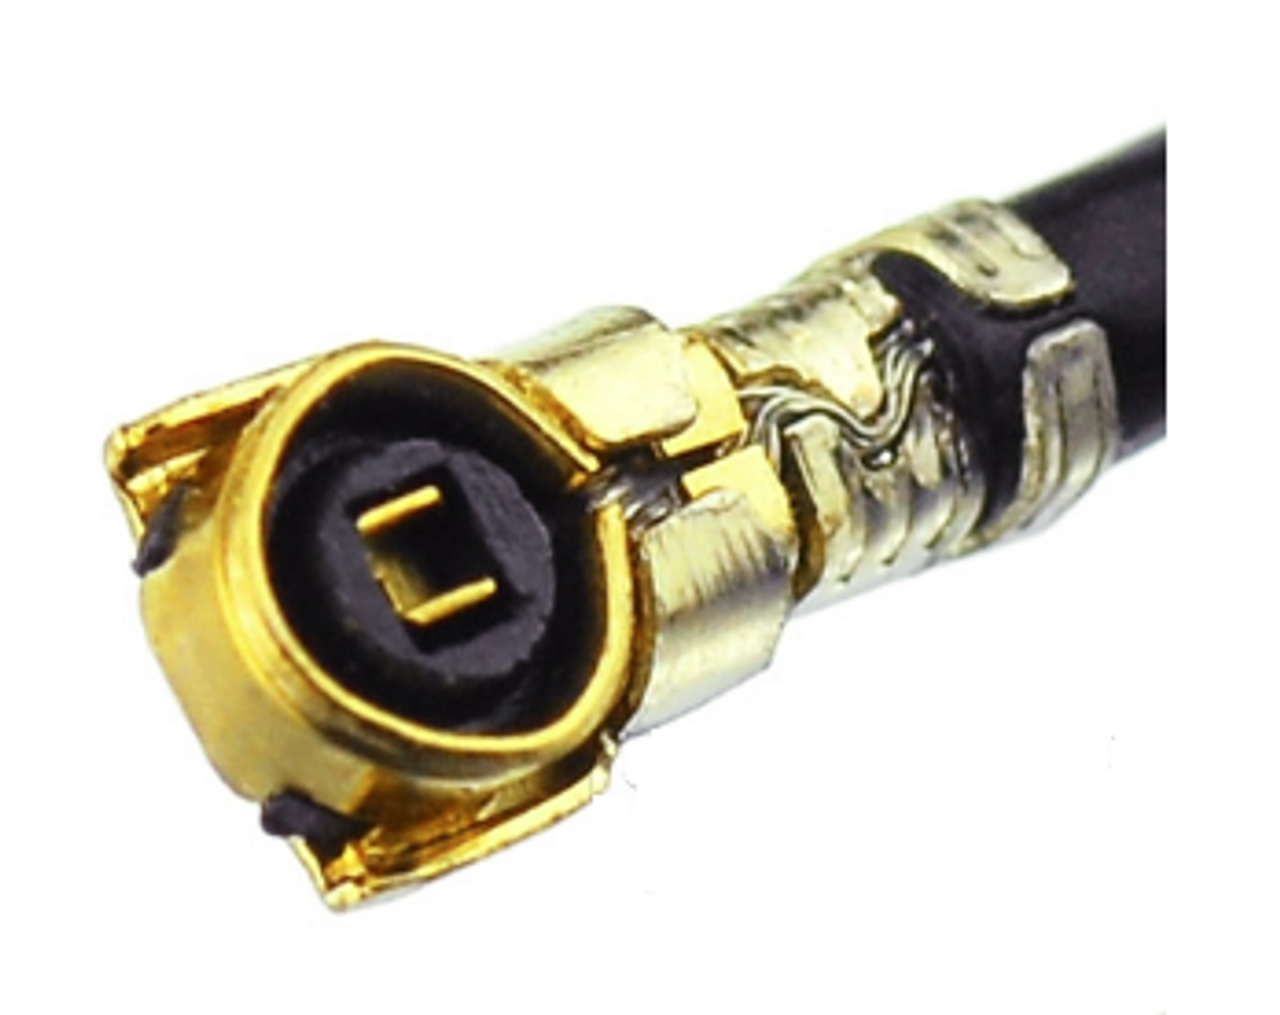 ARS-198662-16 Inch - IPEX MHF4 to IPEX MHF4 Coaxial Cable 0.81mm - HSC